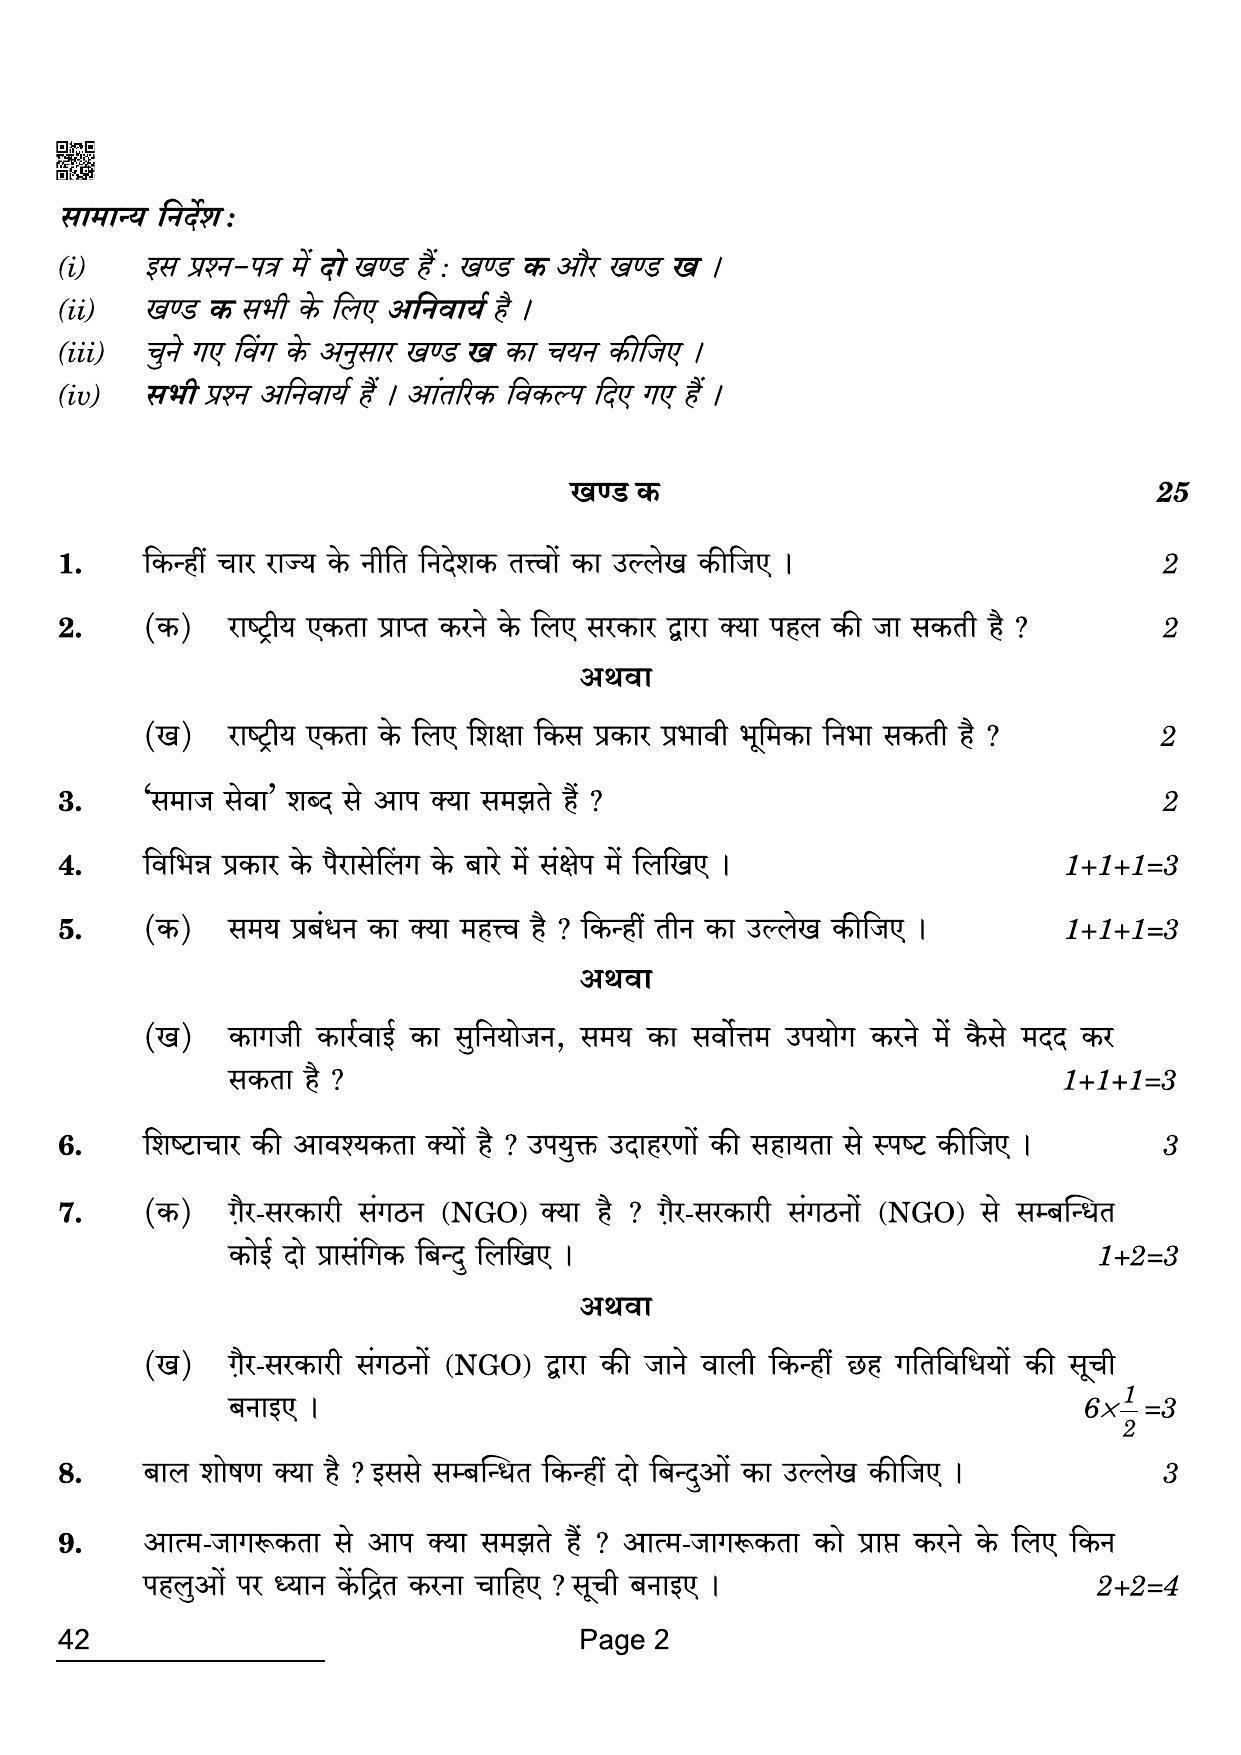 CBSE Class 12 42 NCC 2022 Compartment Question Paper - Page 2